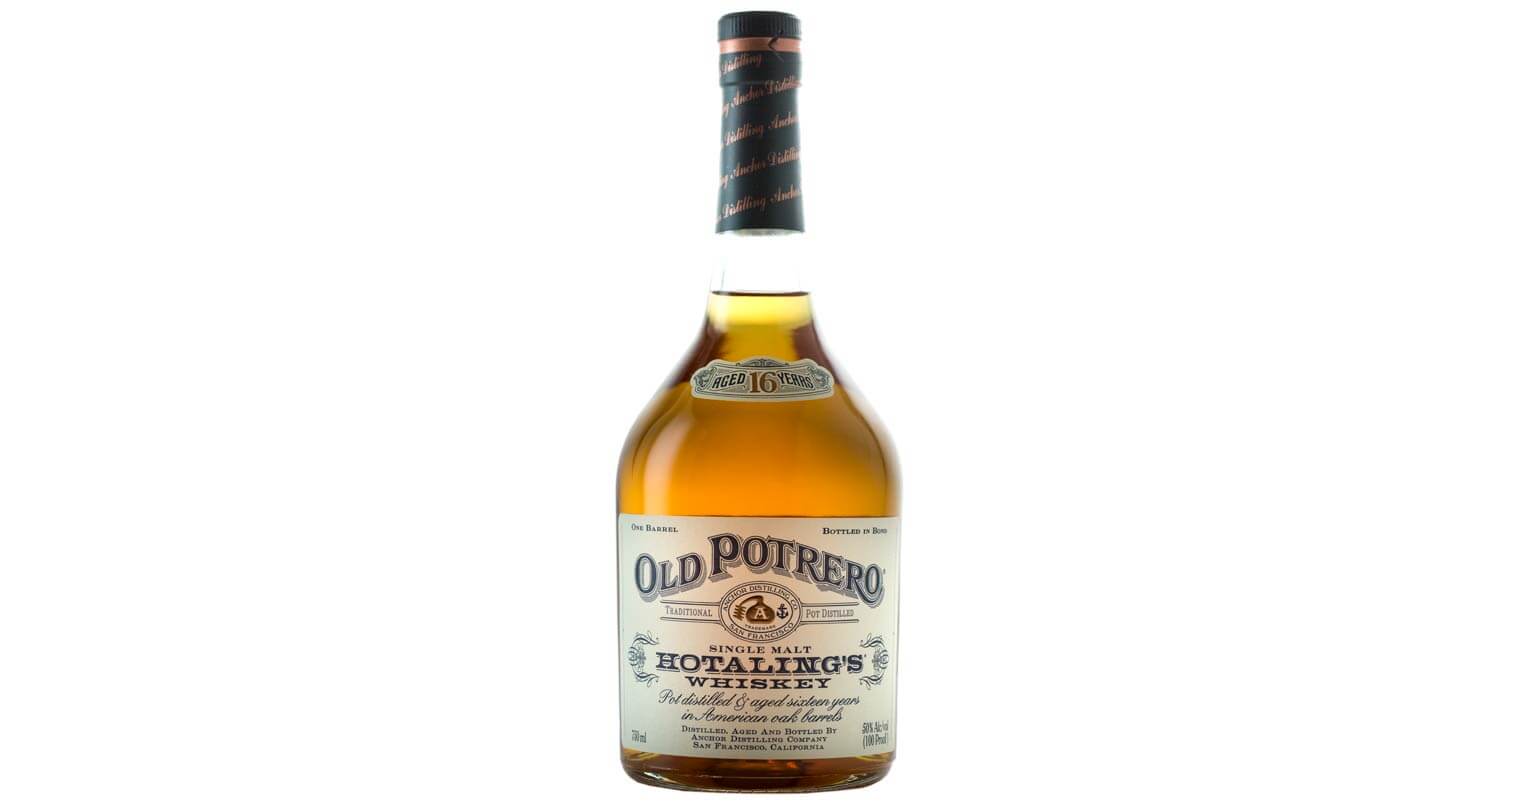 Anchor Distilling Releases Old Potrero Hotaling's Single Malt Rye Whiskey, featured image